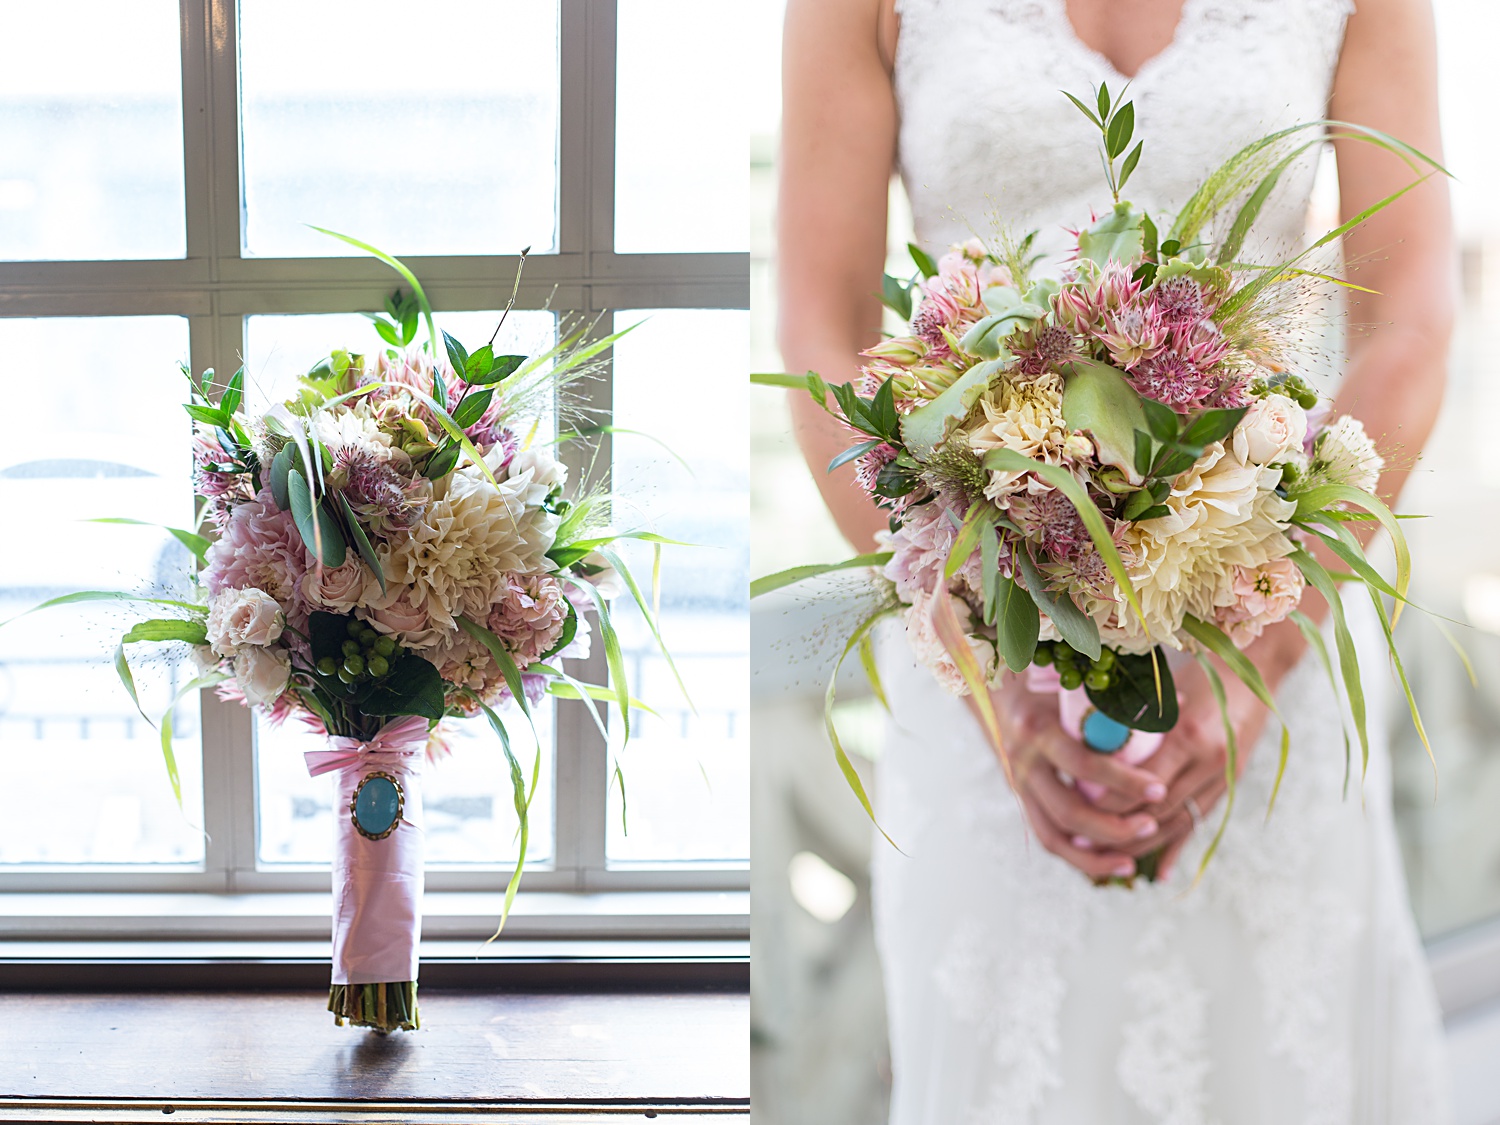 Brass on Baltimore Wedding day details. Bridal bouquet with pinks, greens and yellow